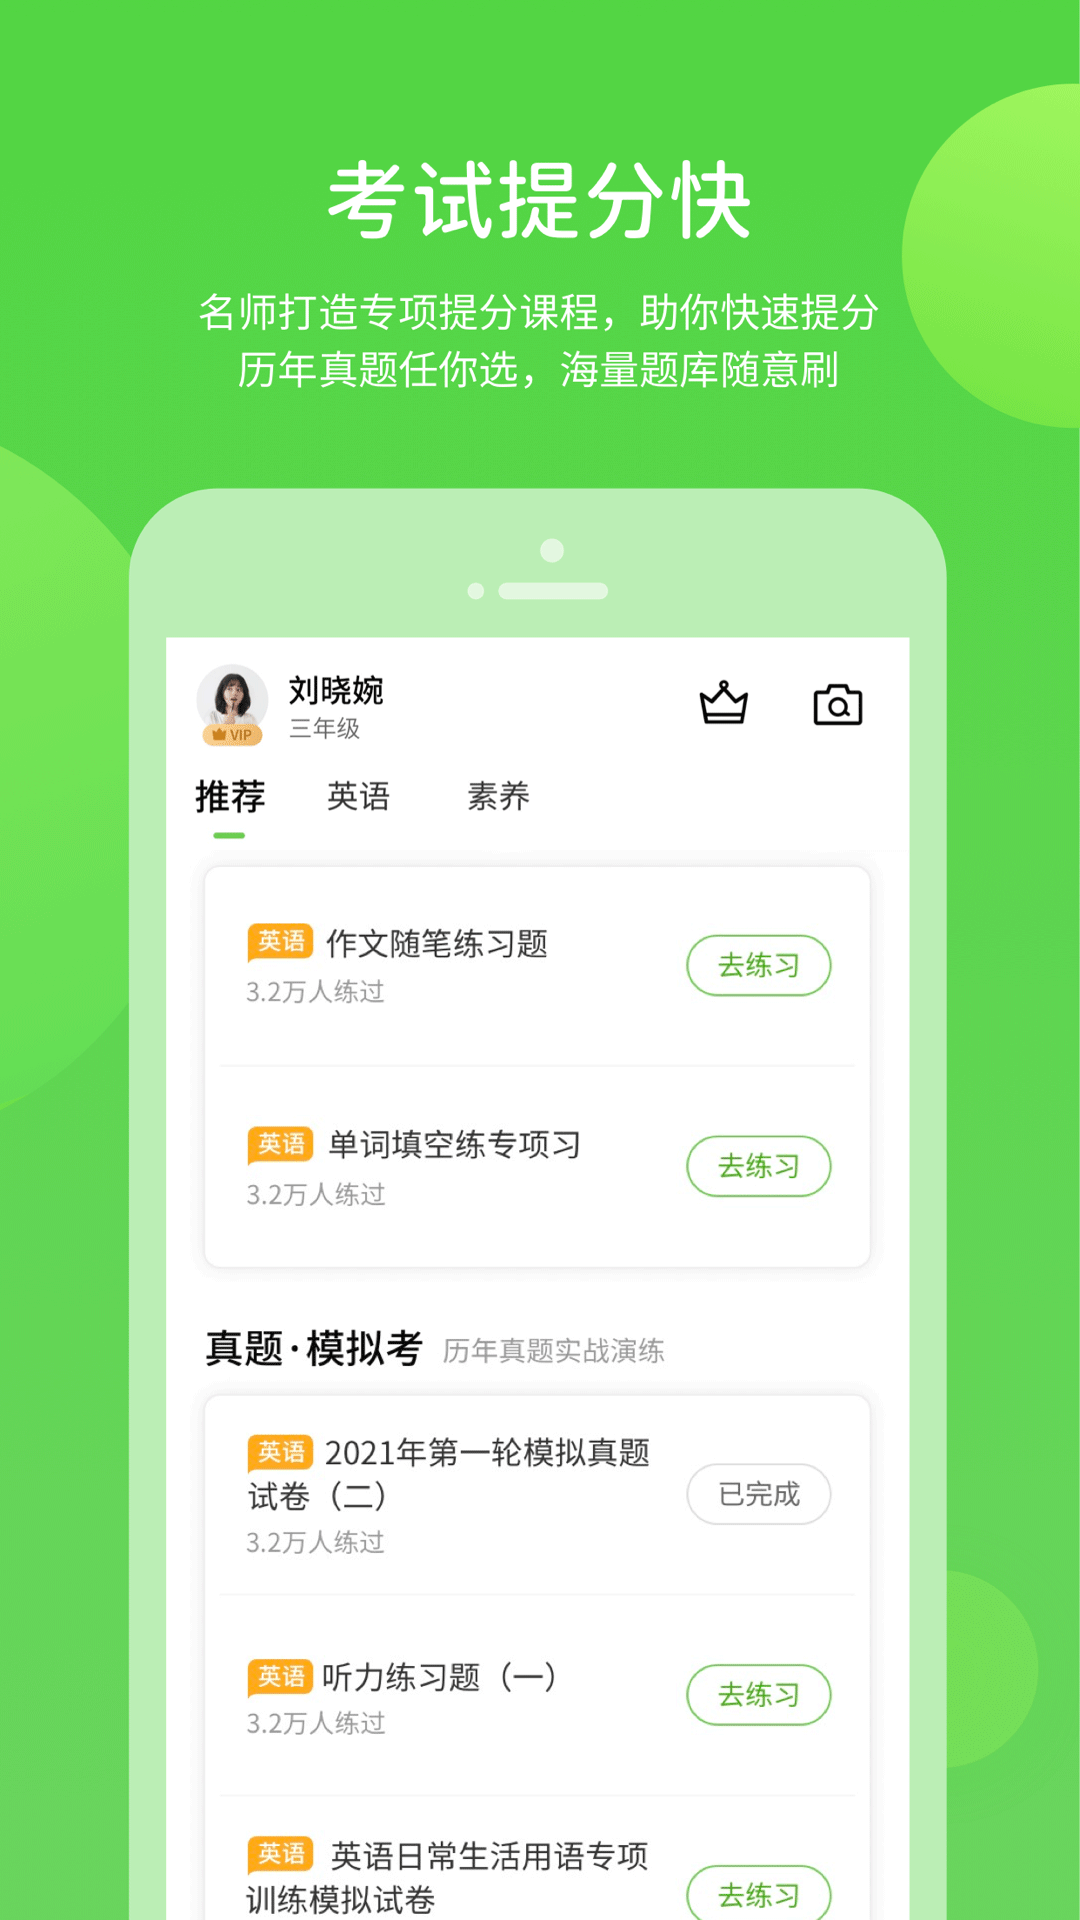 ѧϰAIappѰv5.0.6.0 ֻ